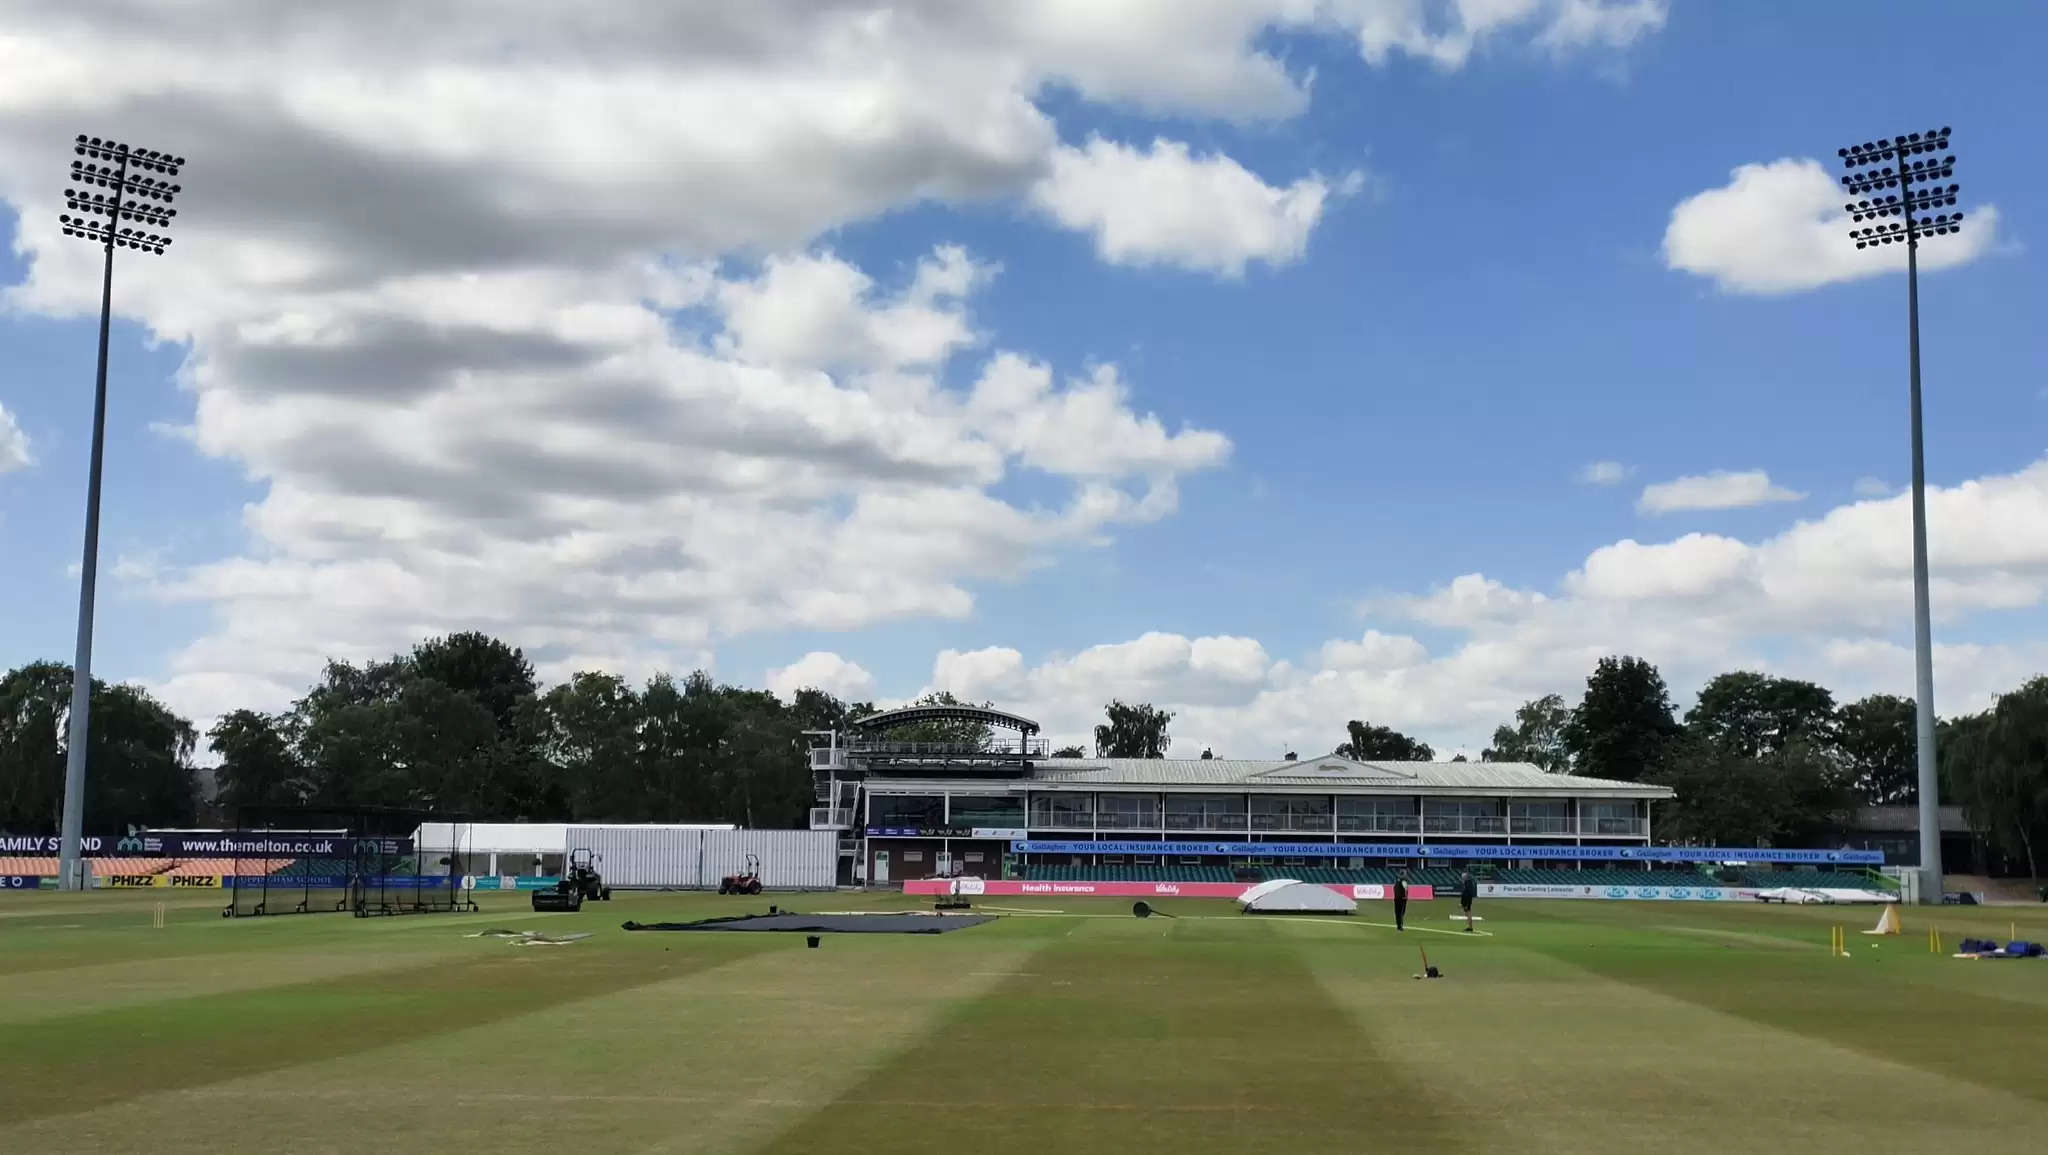 Leicestershire vs India 2022 Live Streaming Details When and Where to Watch LEI vs IND Warm-up match LIVE Telecast on TV in India and UK, Complete Squads, Date and Time